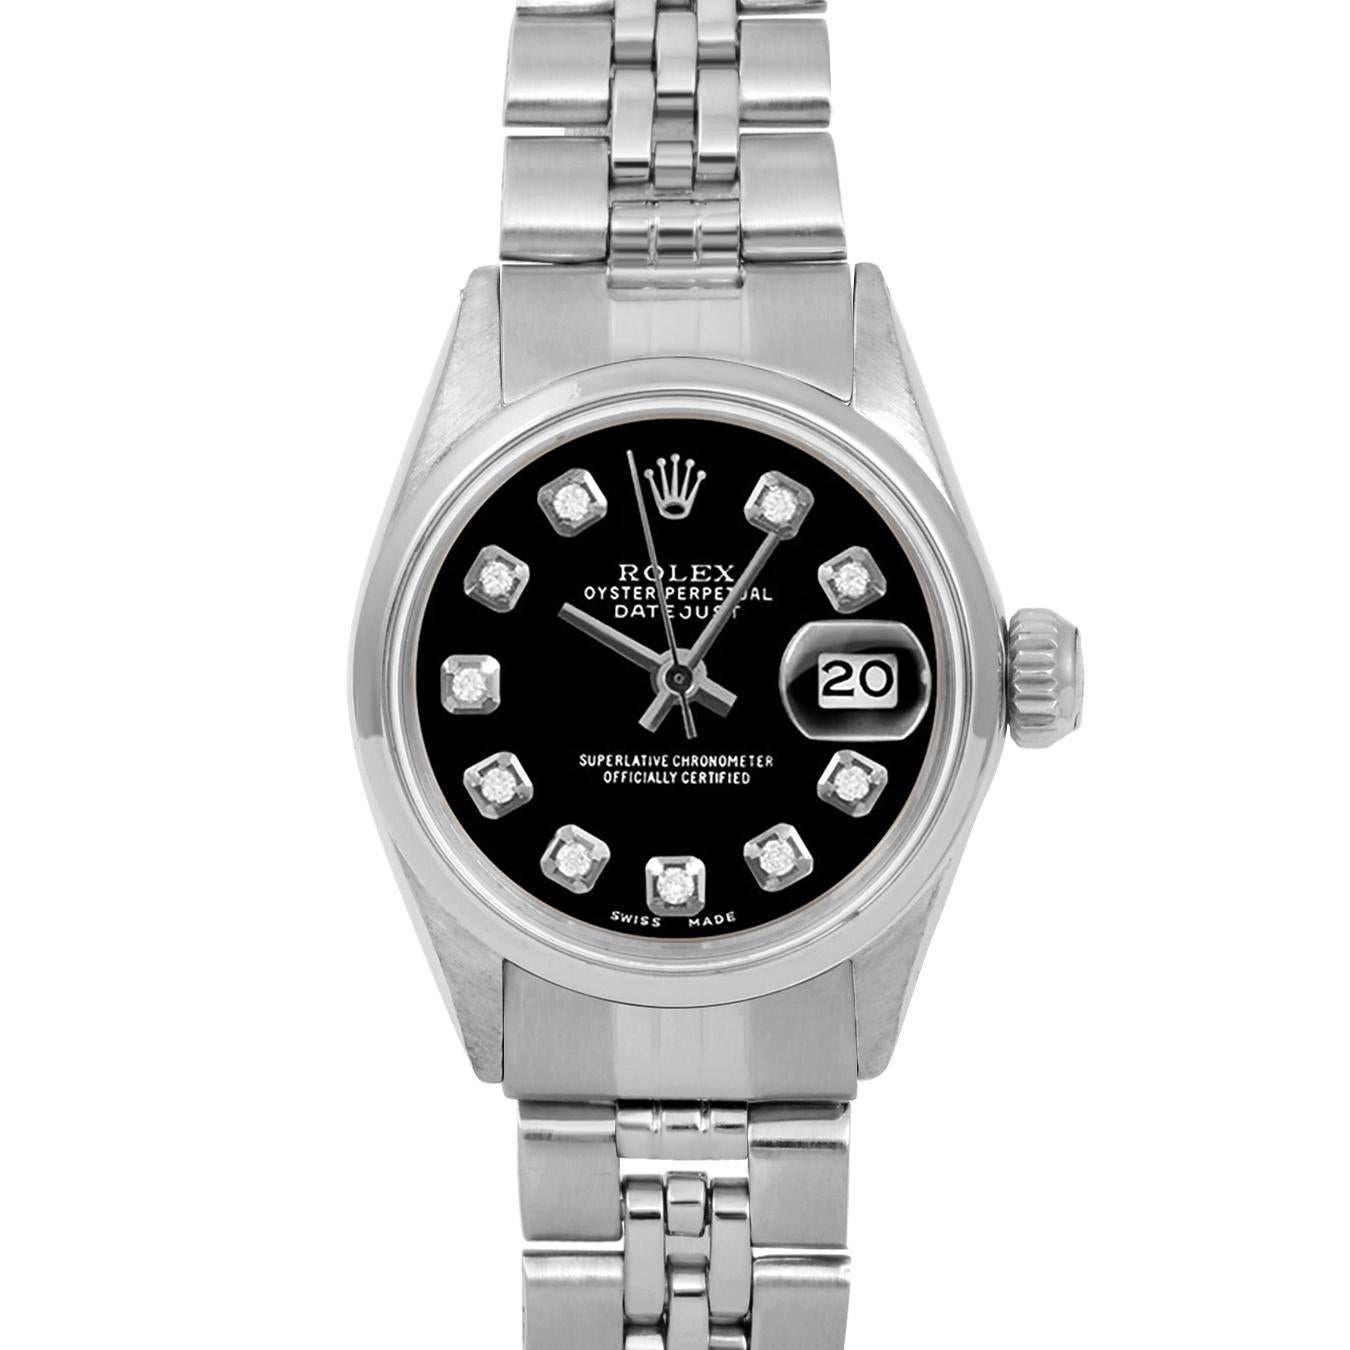 Brand : Rolex
Model : Datejust (Non-Quickset Model)
Gender : Ladies
Metals : Stainless Steel
Case Size : 24 mm

Dial : Custom Black Diamond Dial (This dial is not original Rolex And has been added aftermarket yet is a beautiful Custom